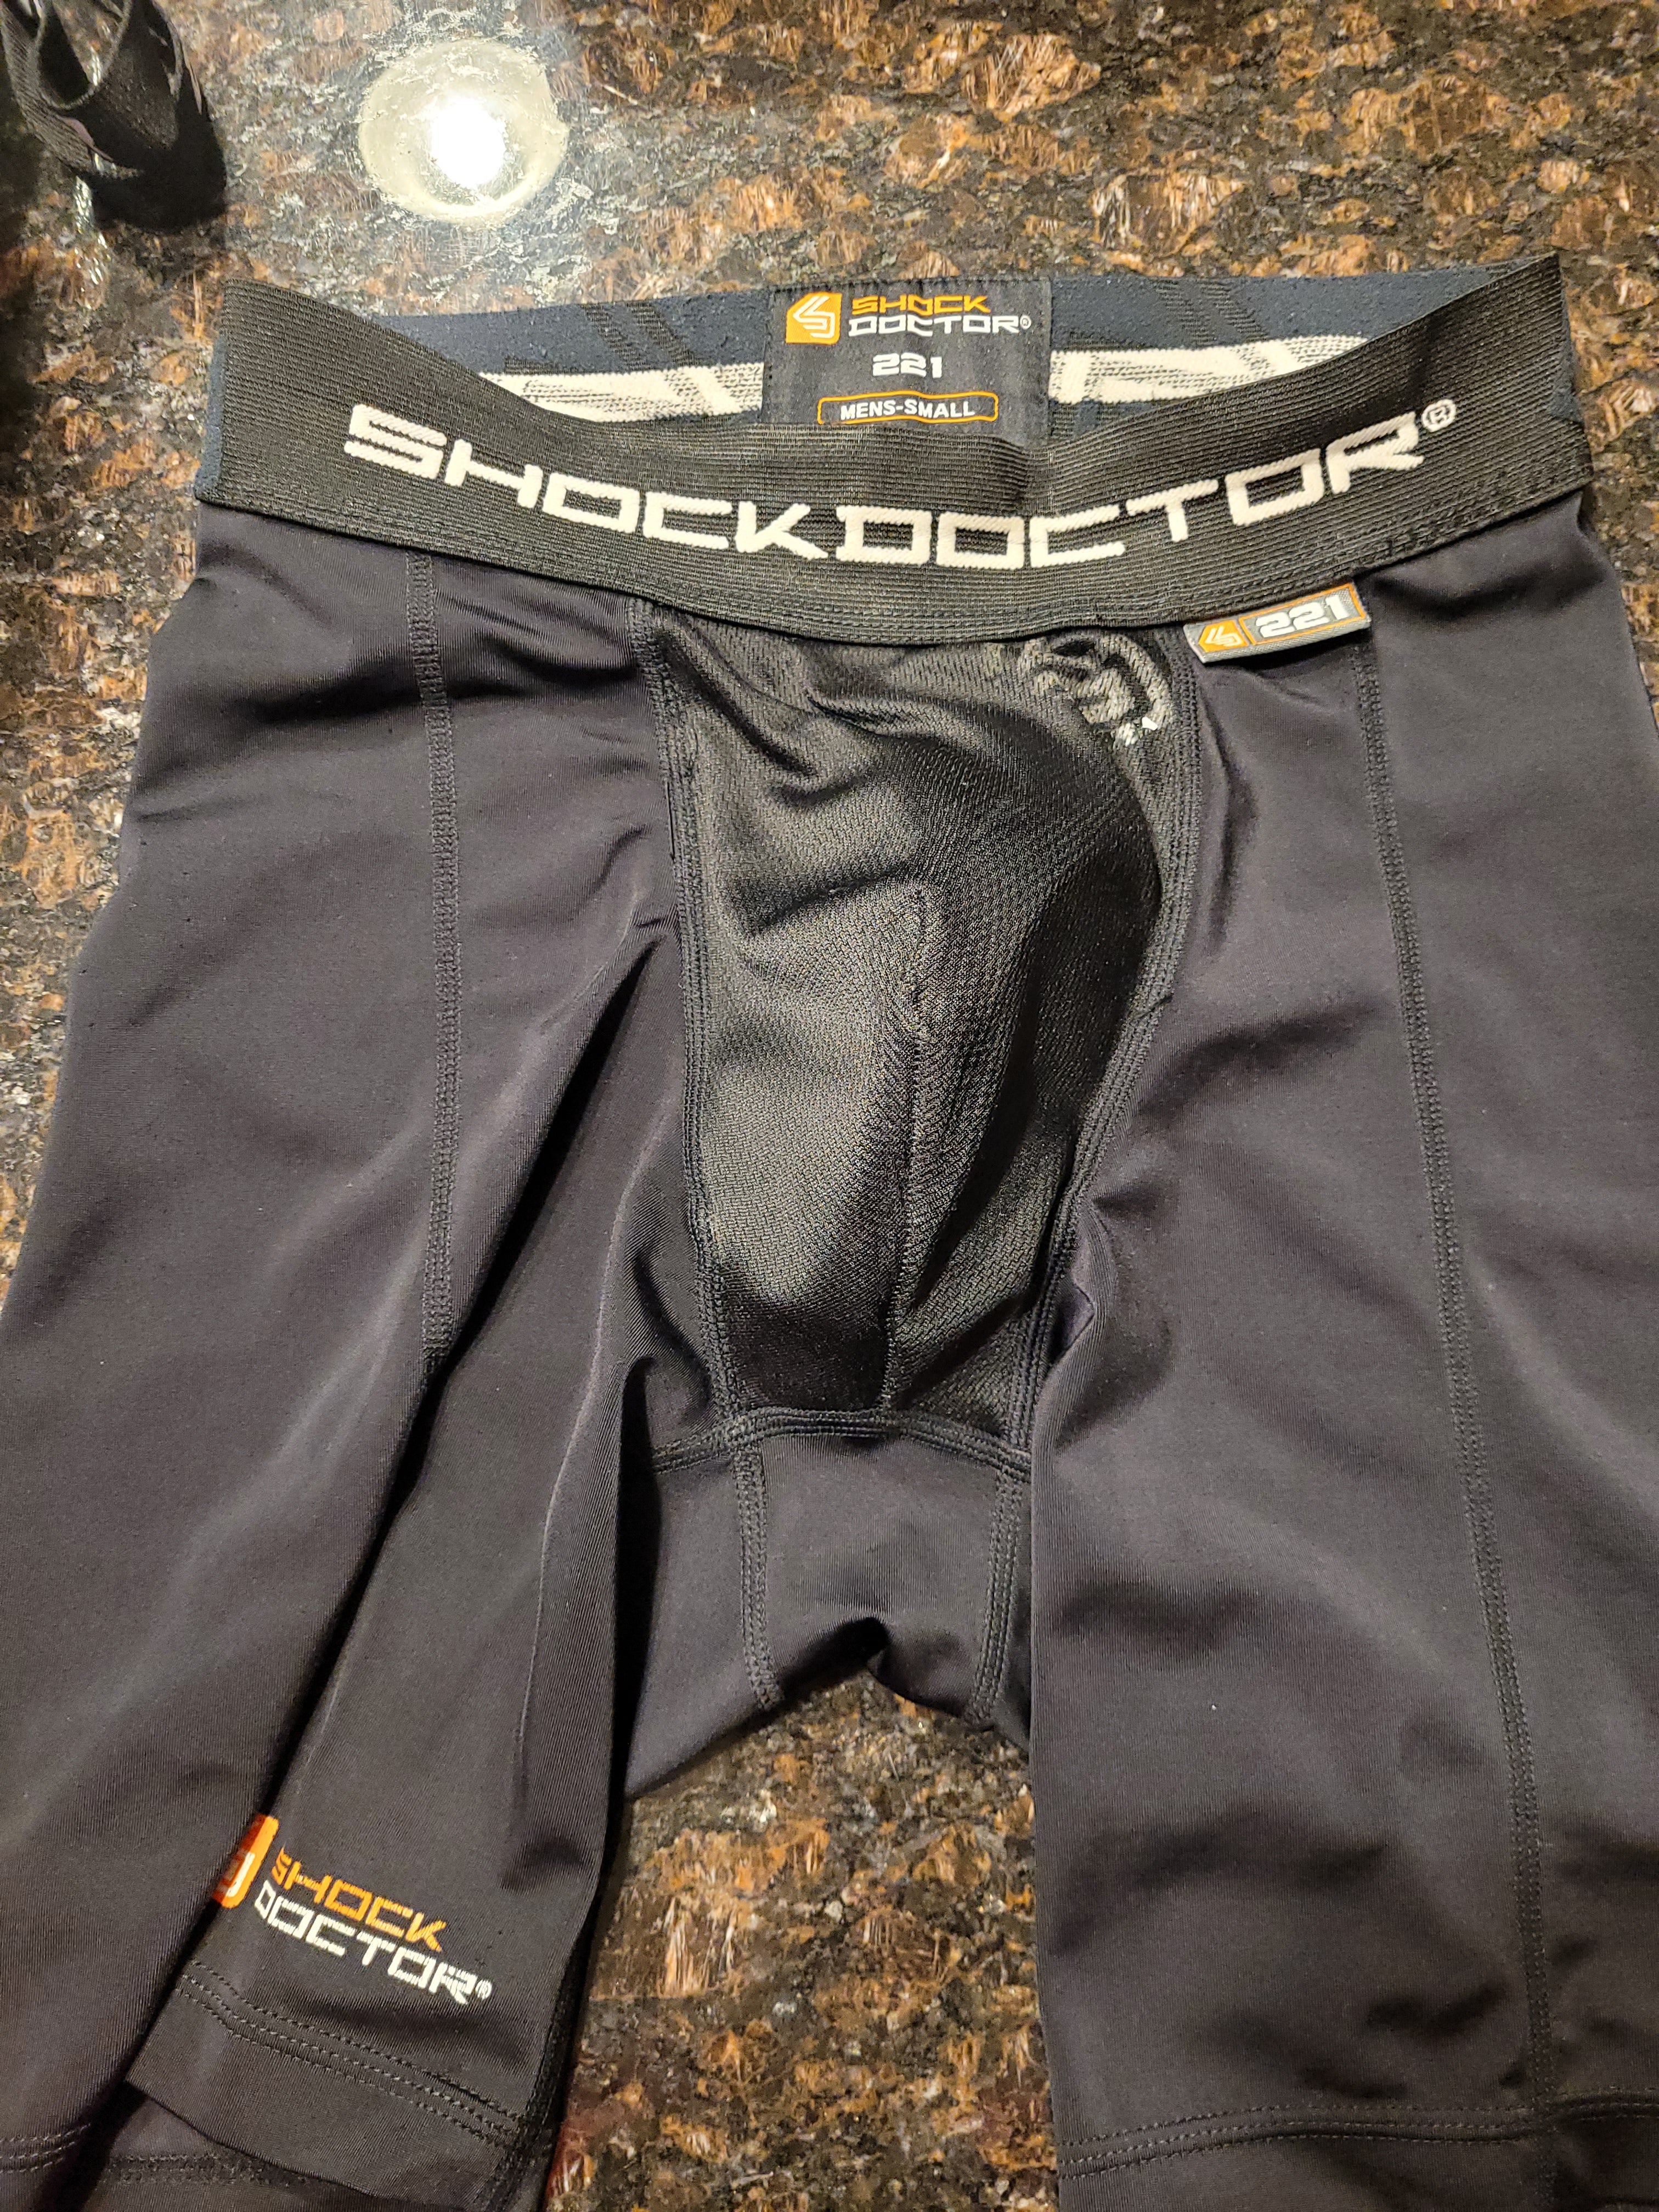 Shock Doctor 221 Compression Shorts with Cup